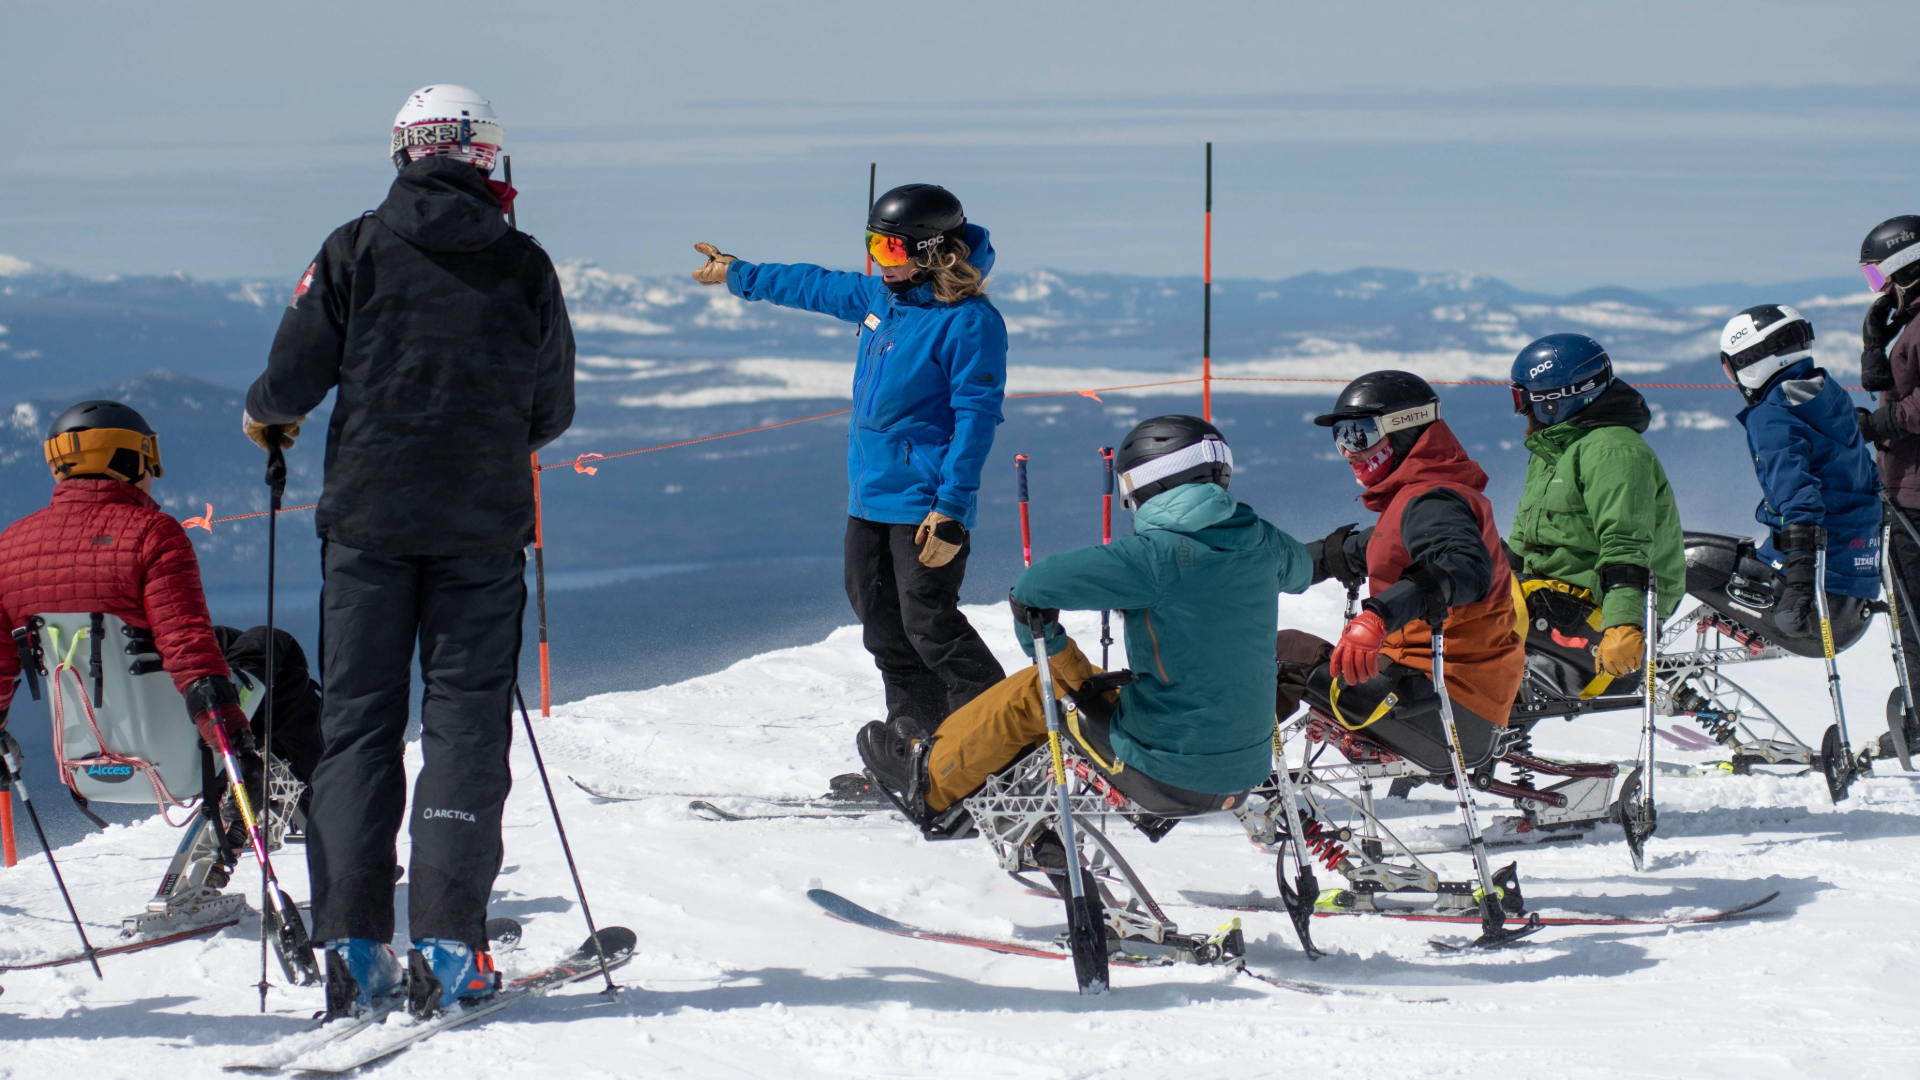 a handful of sit-skiers look to OAS Staff member on skis as they give direction at the top of summit. mountains visible in the distance from the panoramic view